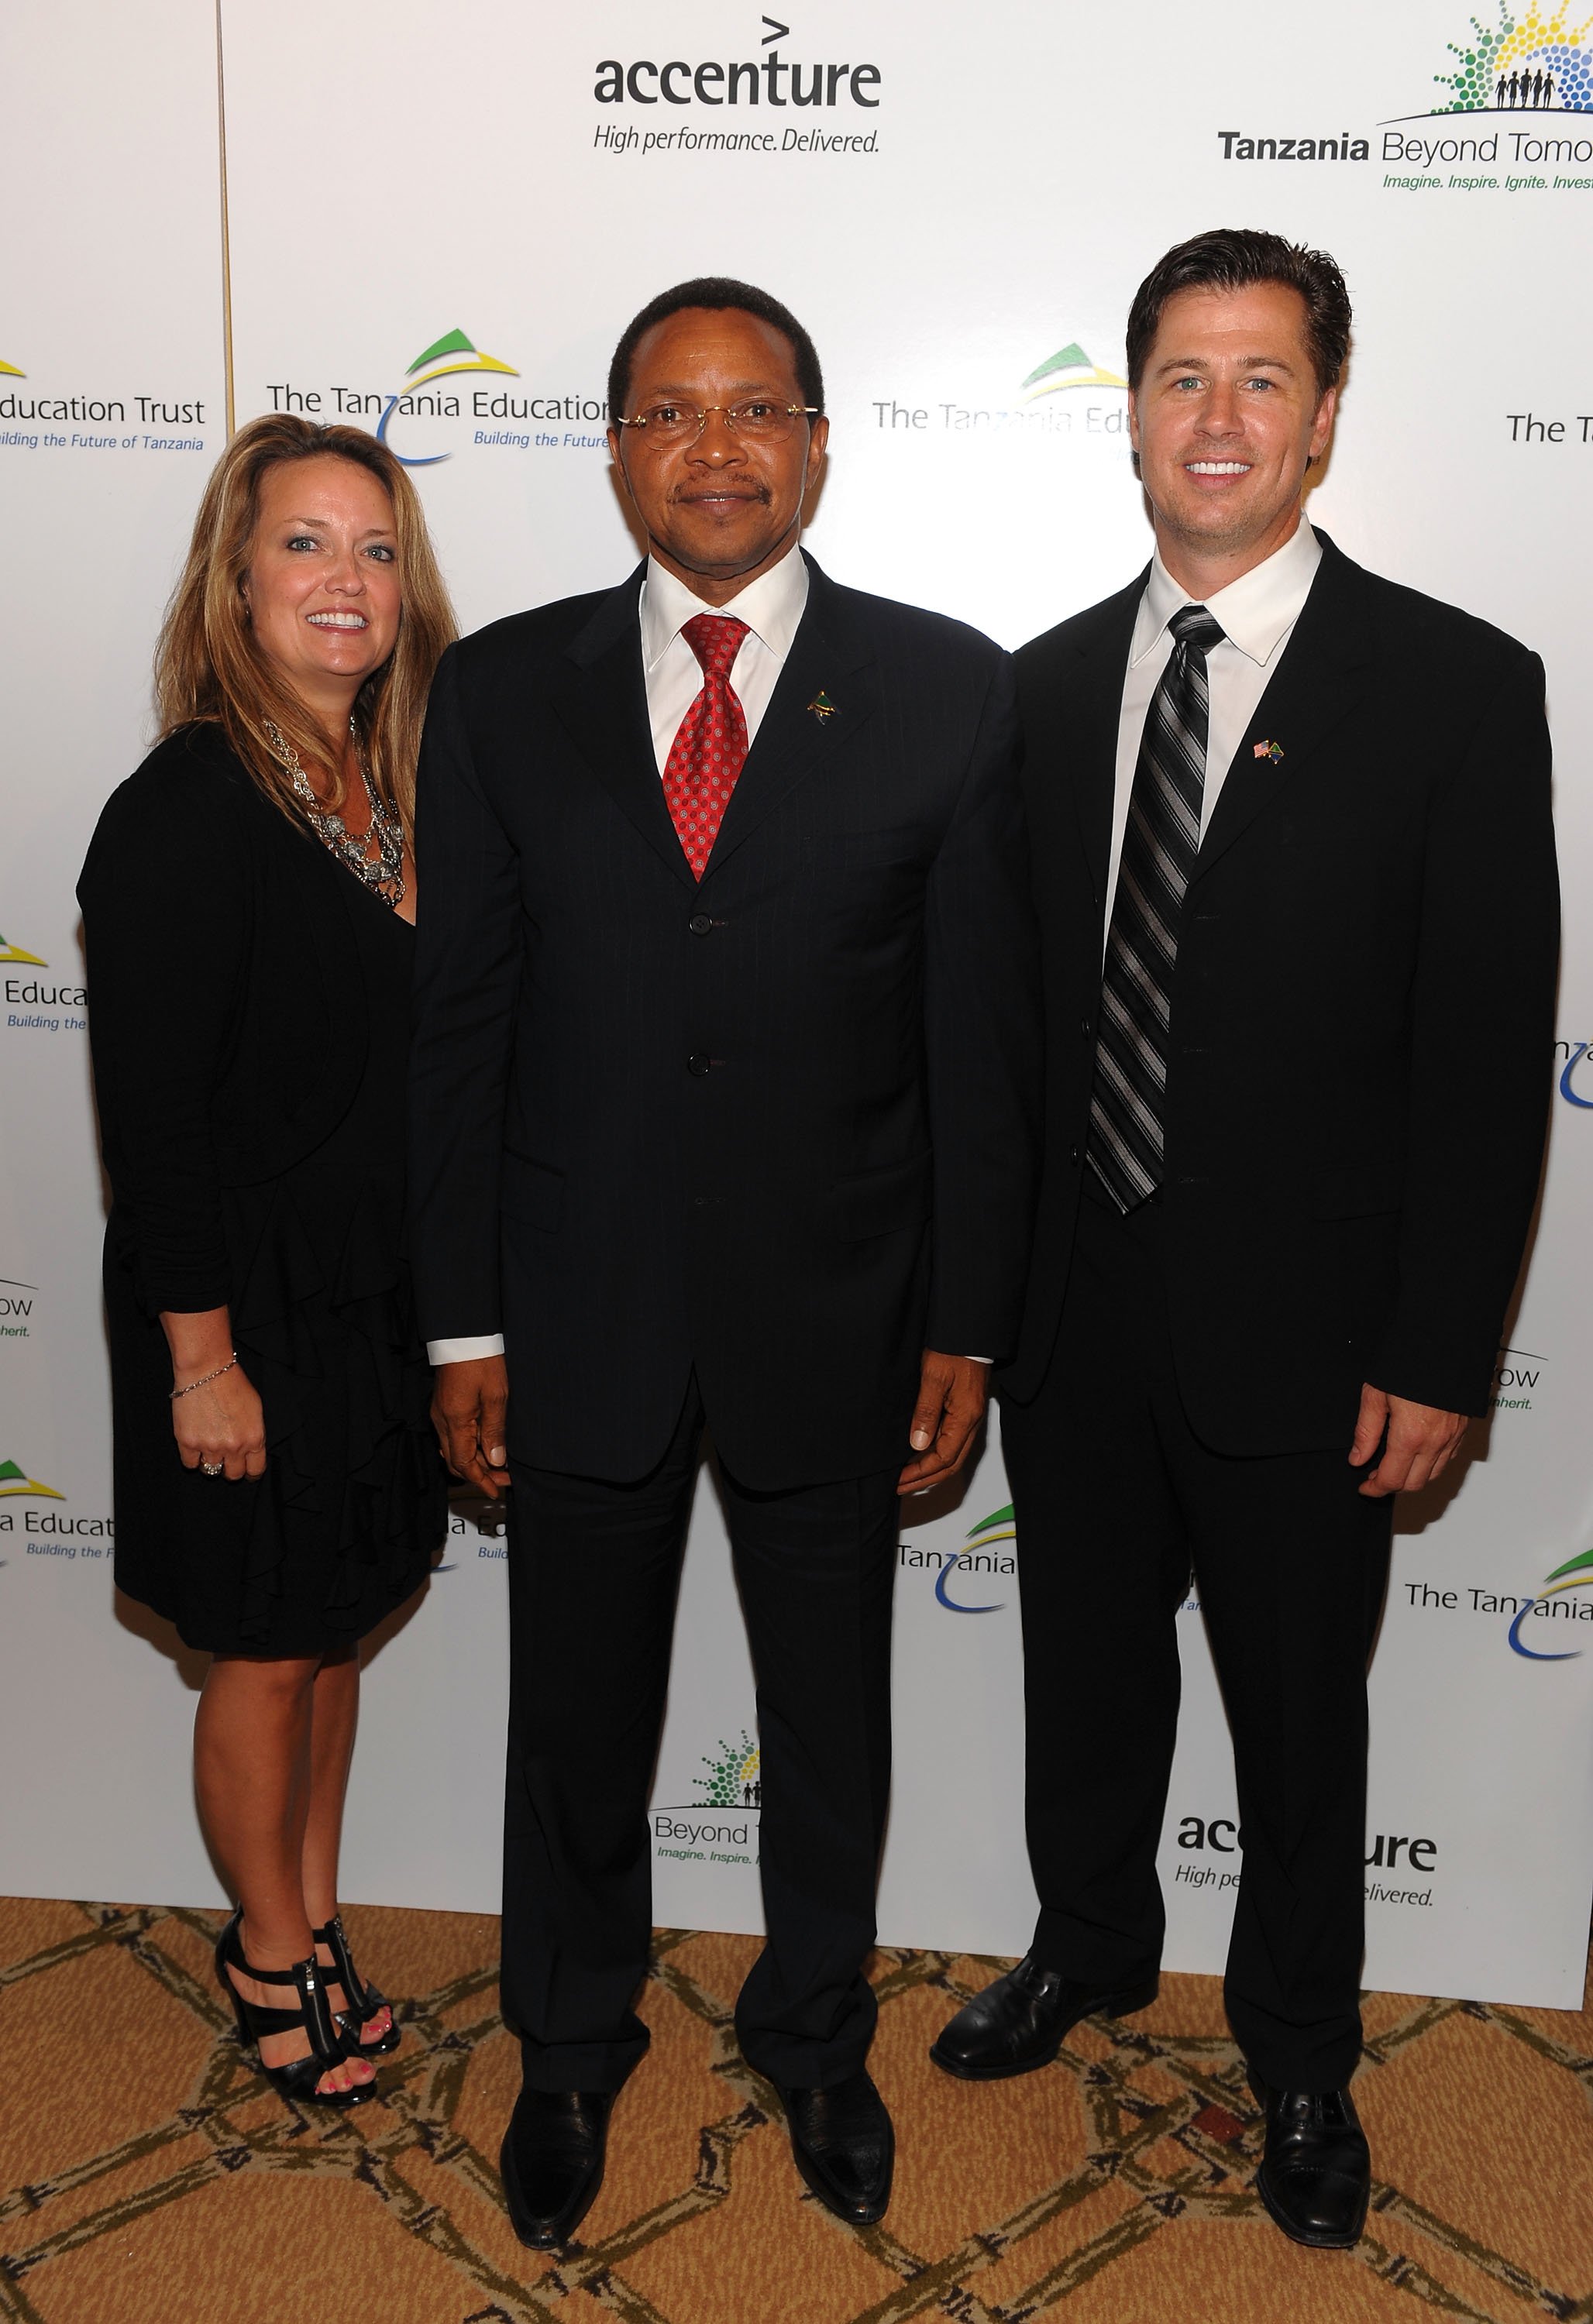 Doug and Lisa Pitt posing for a picture with President Jakaya Kikwete on April 19, 2010 in New York City | Source: Getty Images 